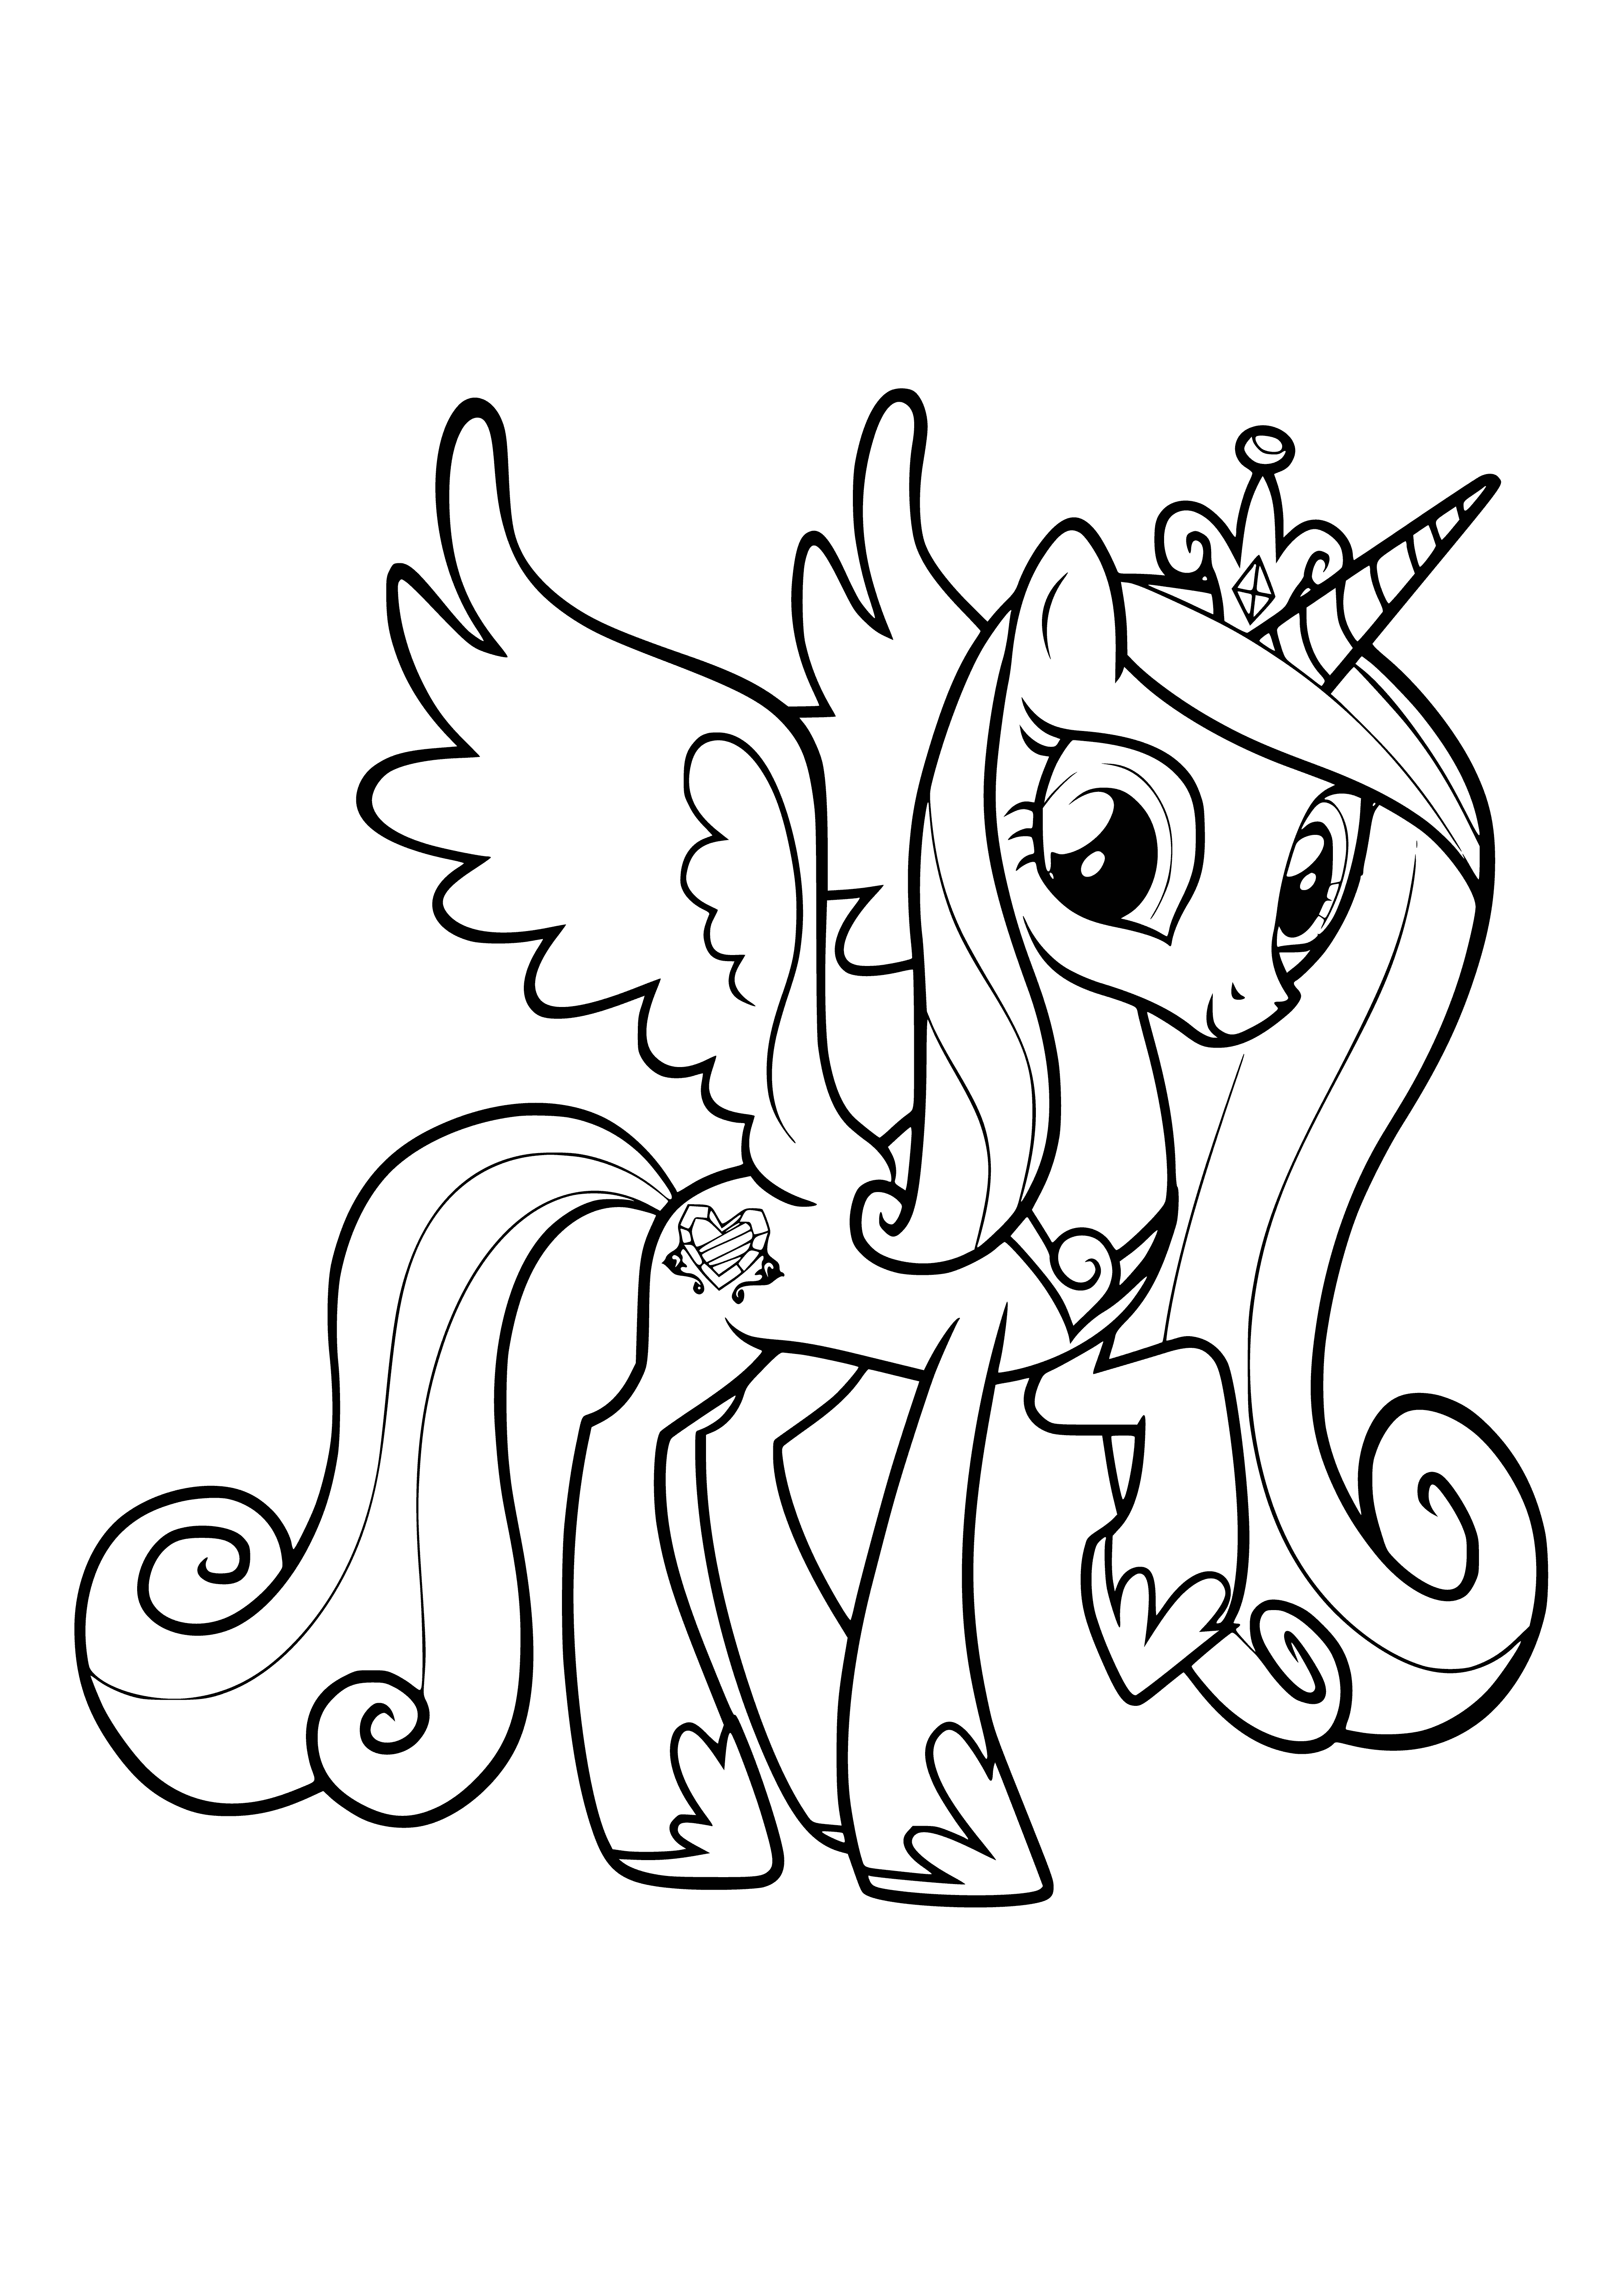 coloring page: Princess Cadance born, daughter of Sombra & Chrysalis. She had blue eyes & pink mane. Enjoyed singing & dancing, beloved by her subjects.